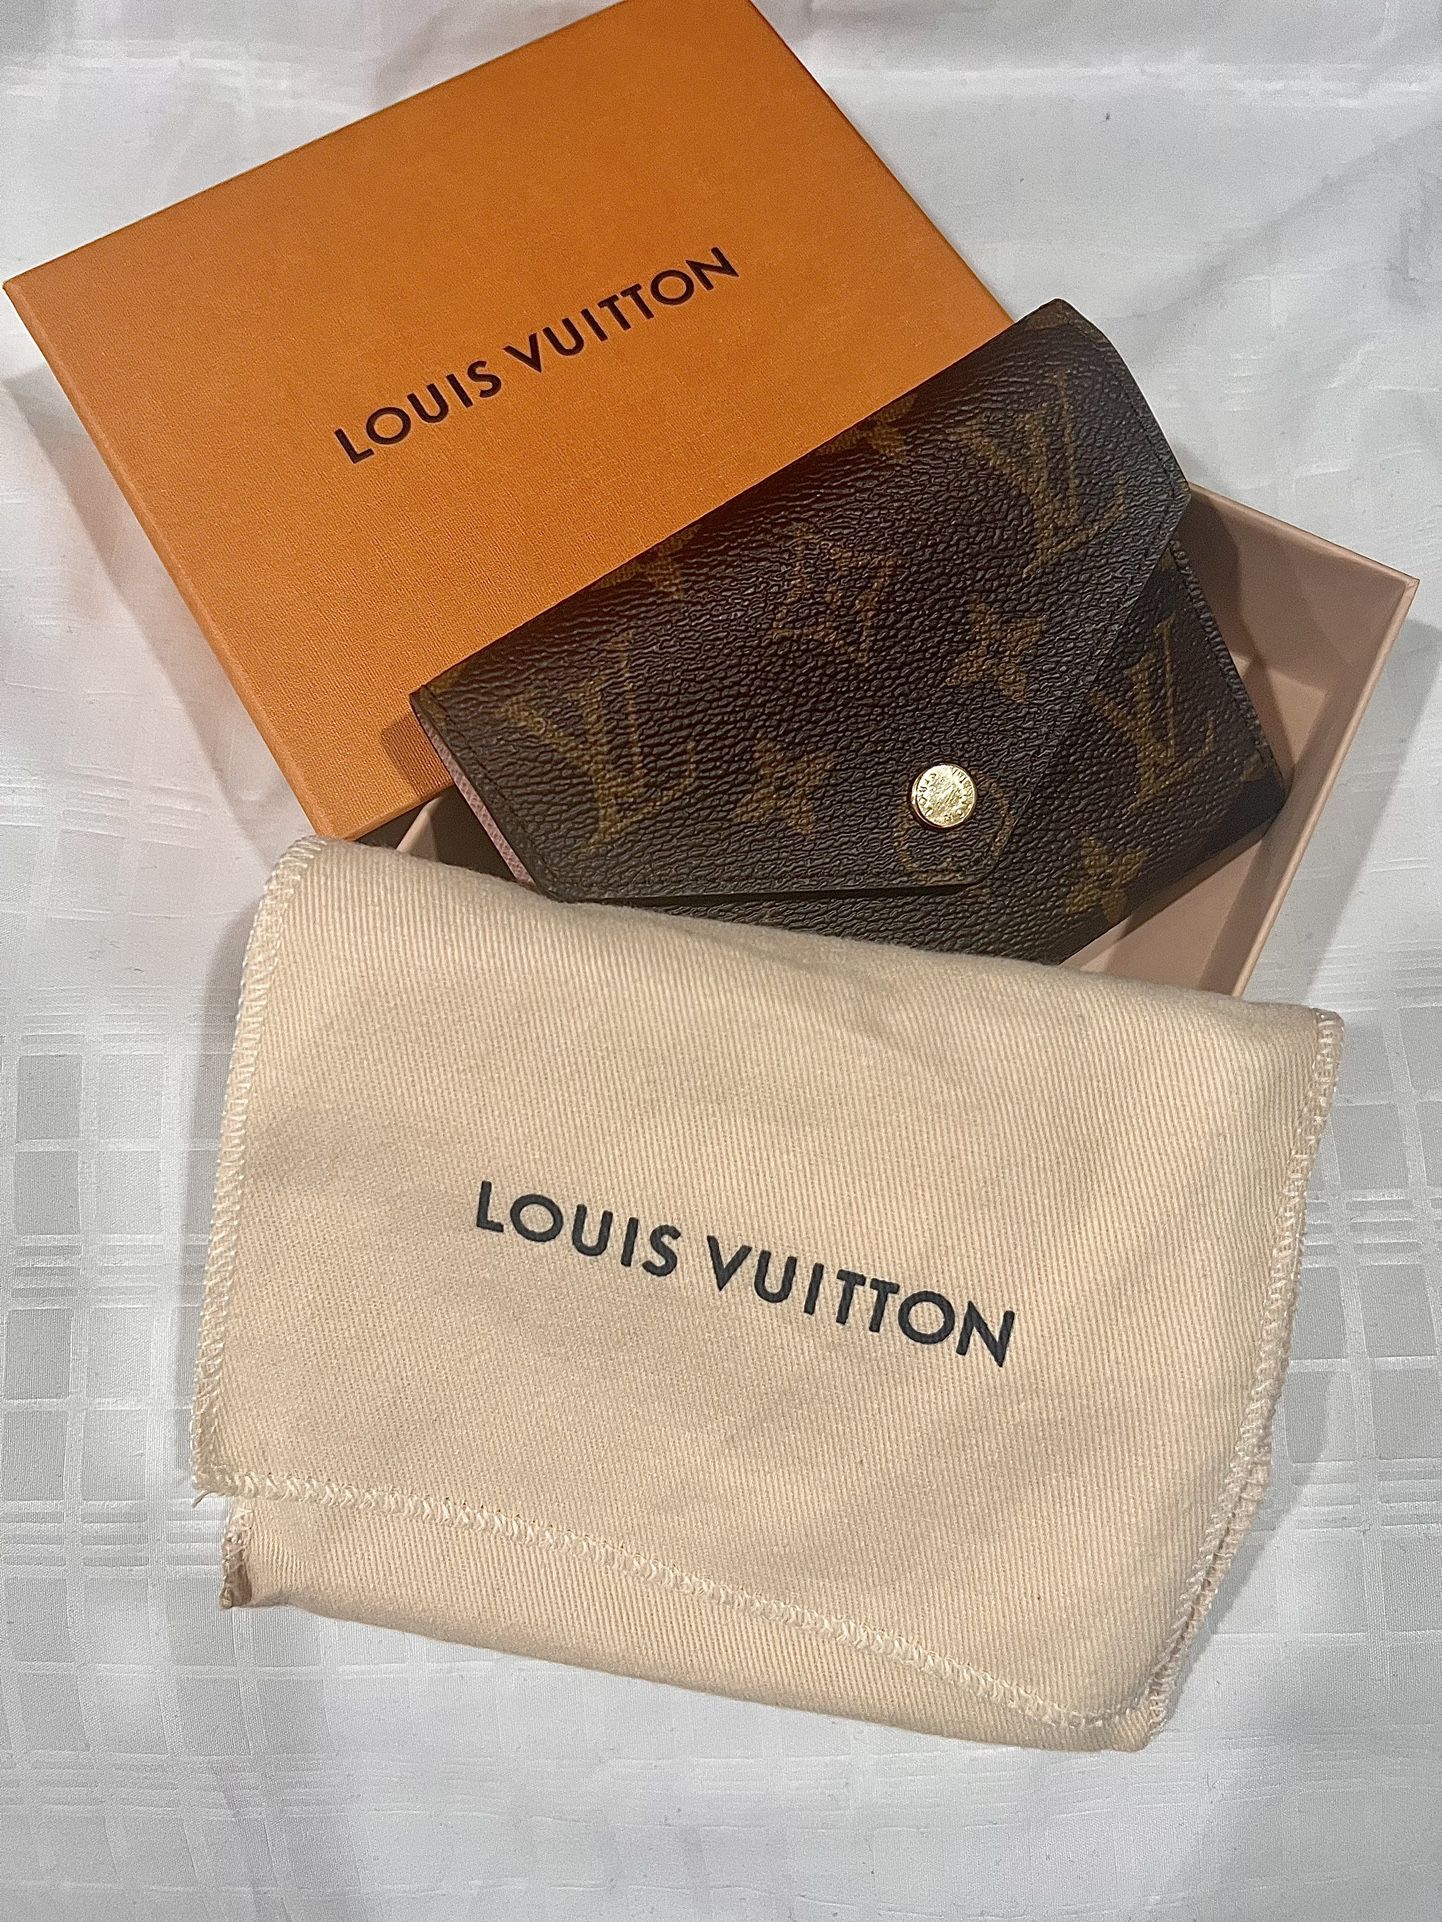 Used louis vuitton victorine wallet - LEATHER